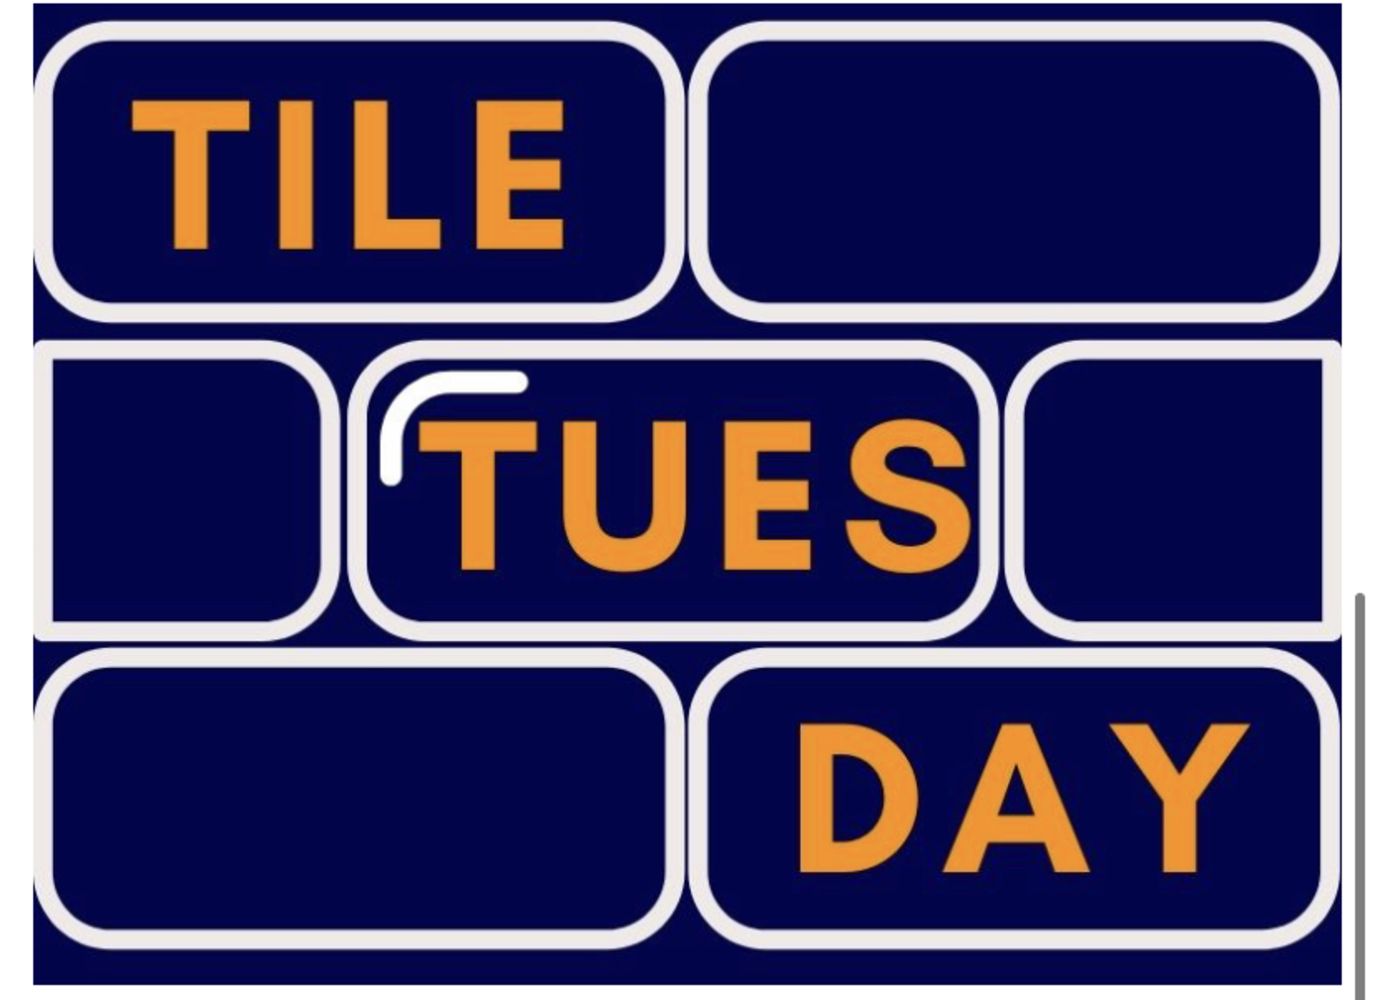 No Reserve - Tile Tuesday - “over £80k worth of tiles – Sourced from Johnsons Tiles” - 20th July 2021